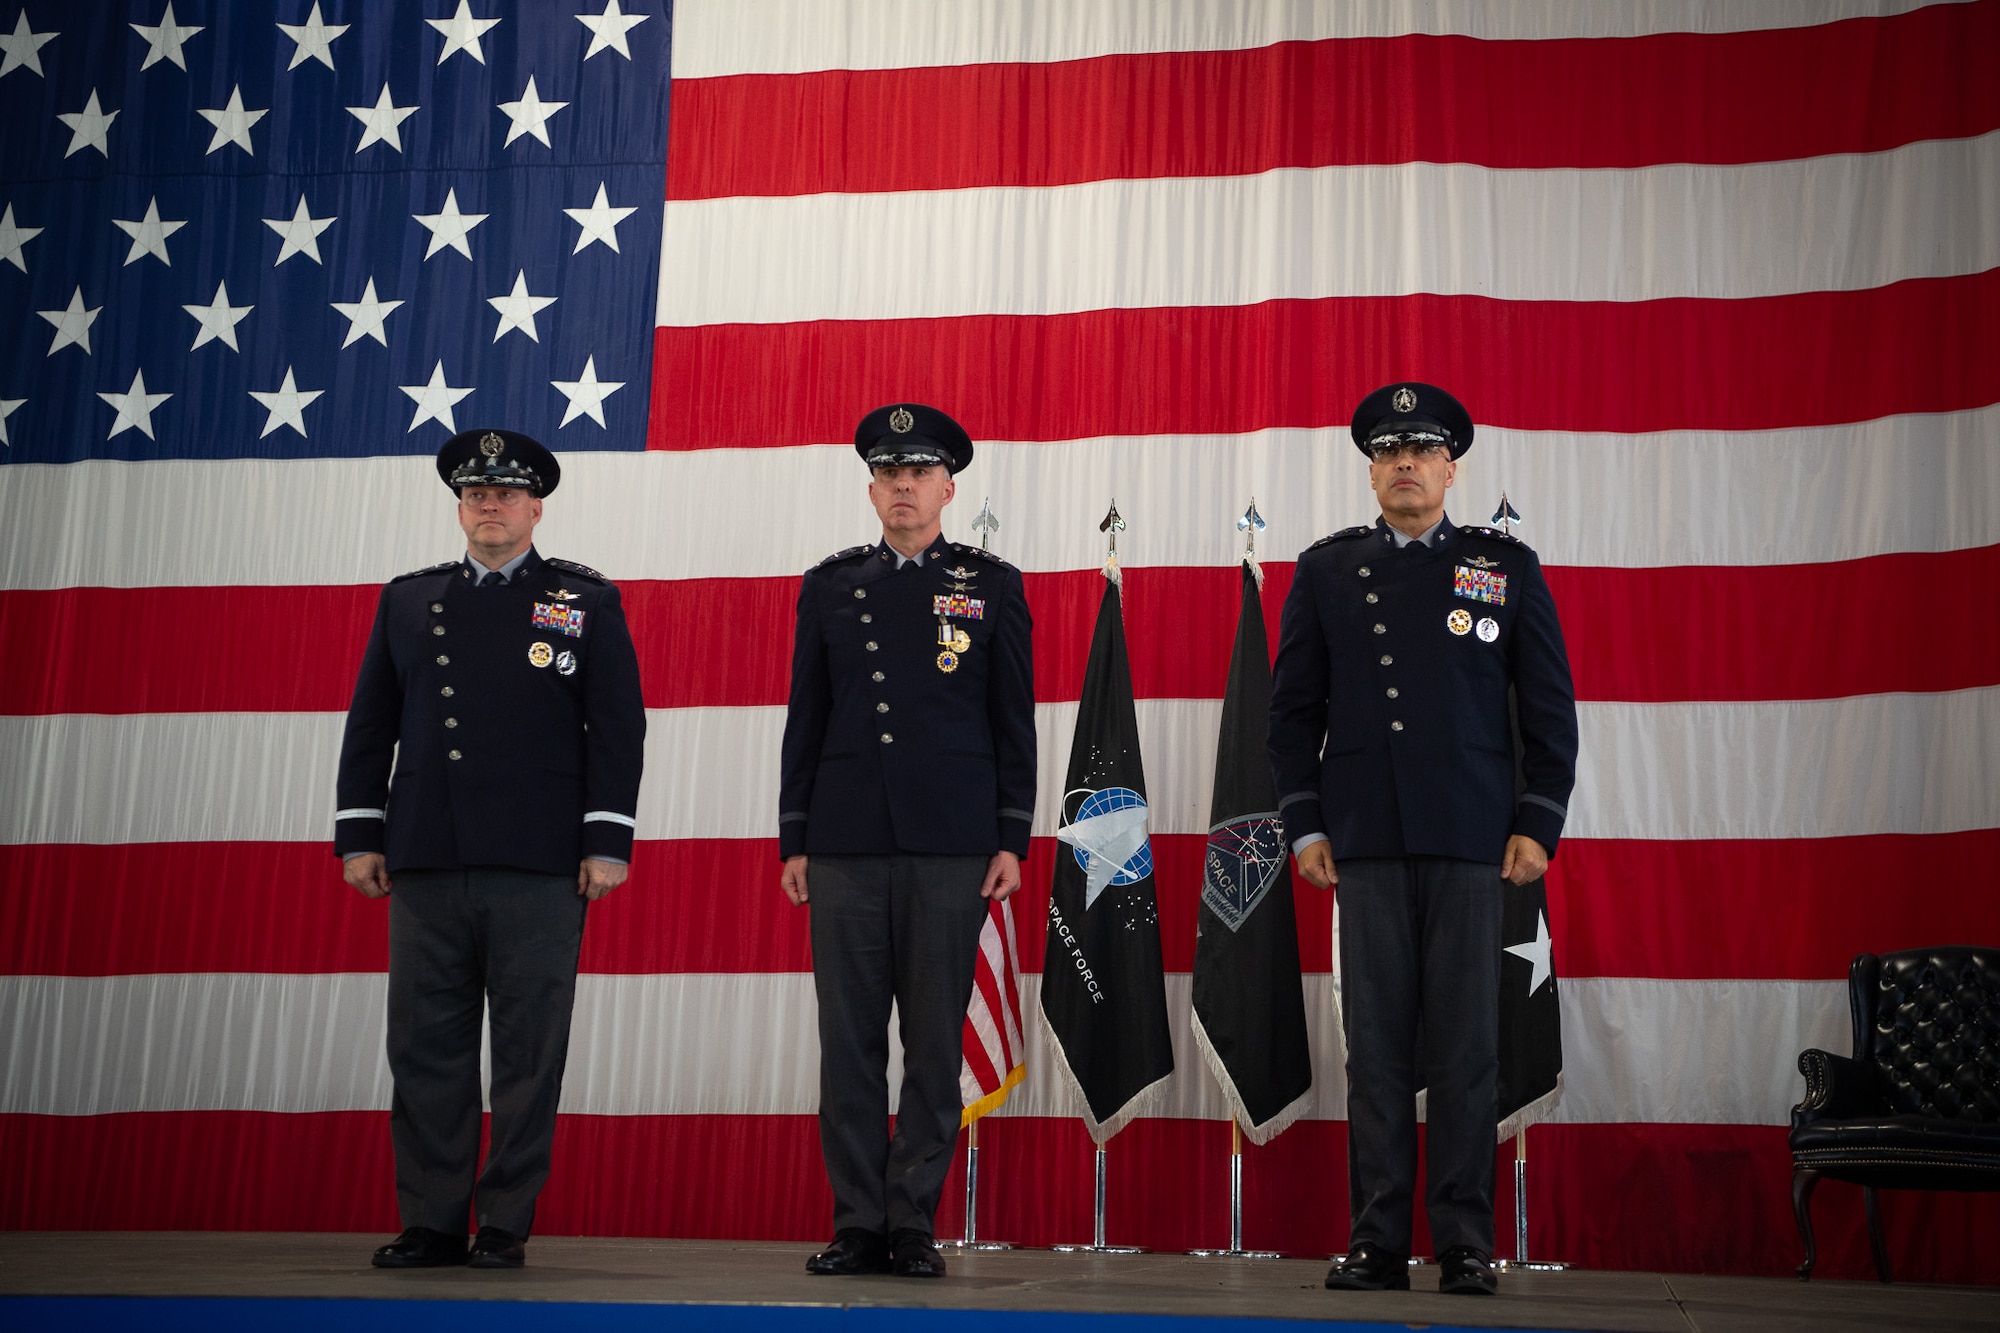 The U.S. Space Force’s Space Operations Command held a change of command ceremony at Peterson Space Force Base, Colo., Jan. 9, where Lt. Gen. Stephen Whiting relinquished command to Lt. Gen. David N. Miller Jr.